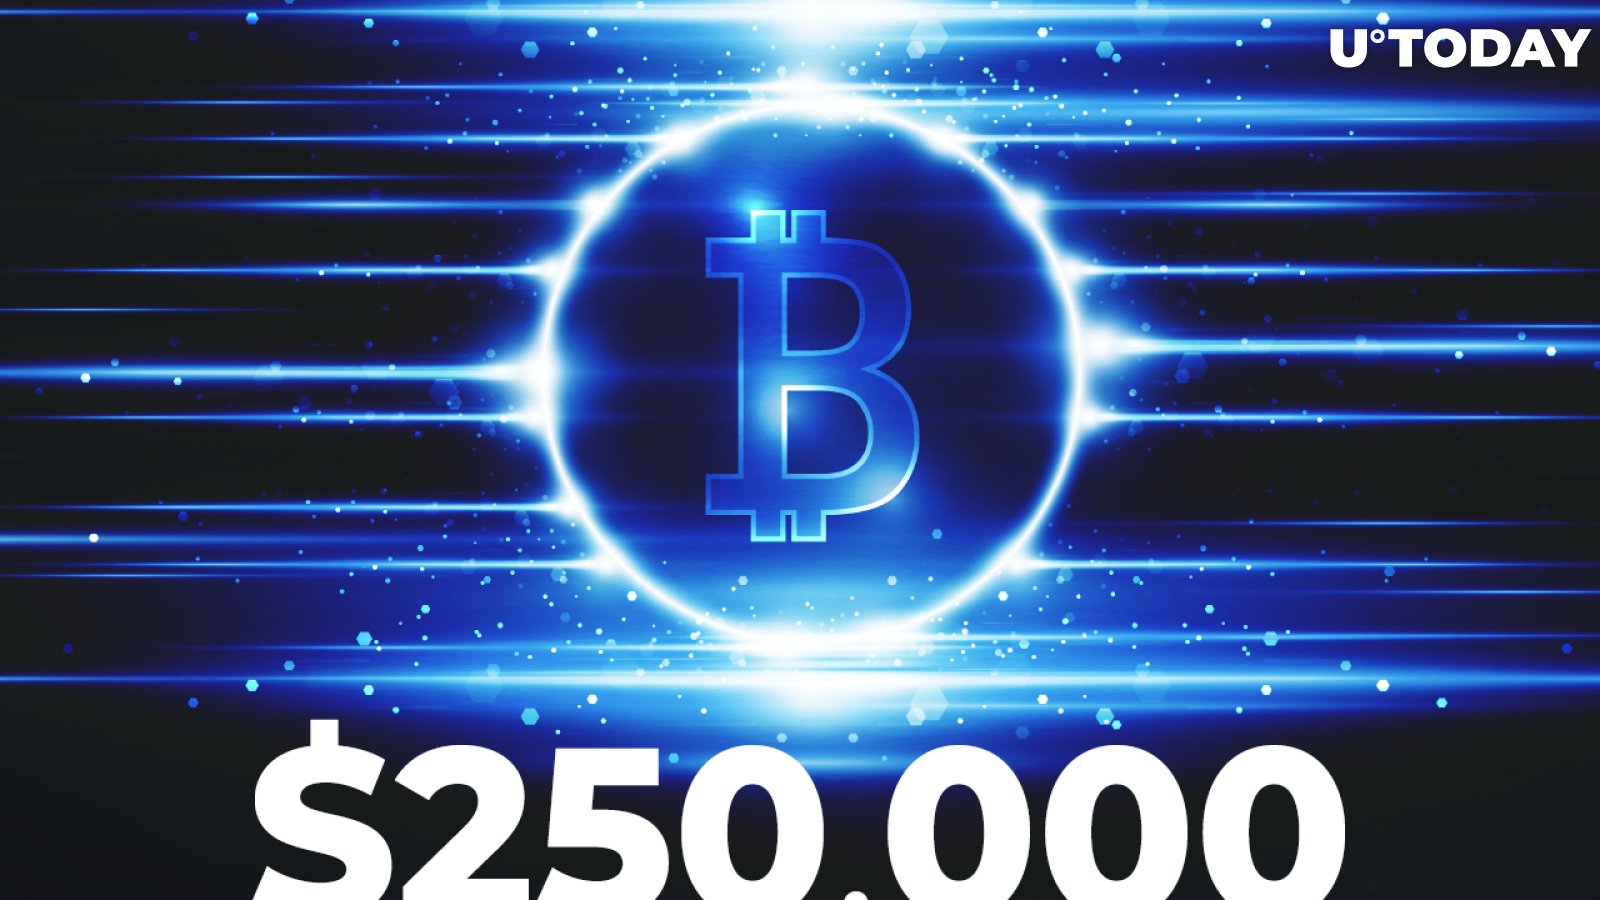 Here's How Bitcoin Could Hit $250,000, According to Mark Yusko